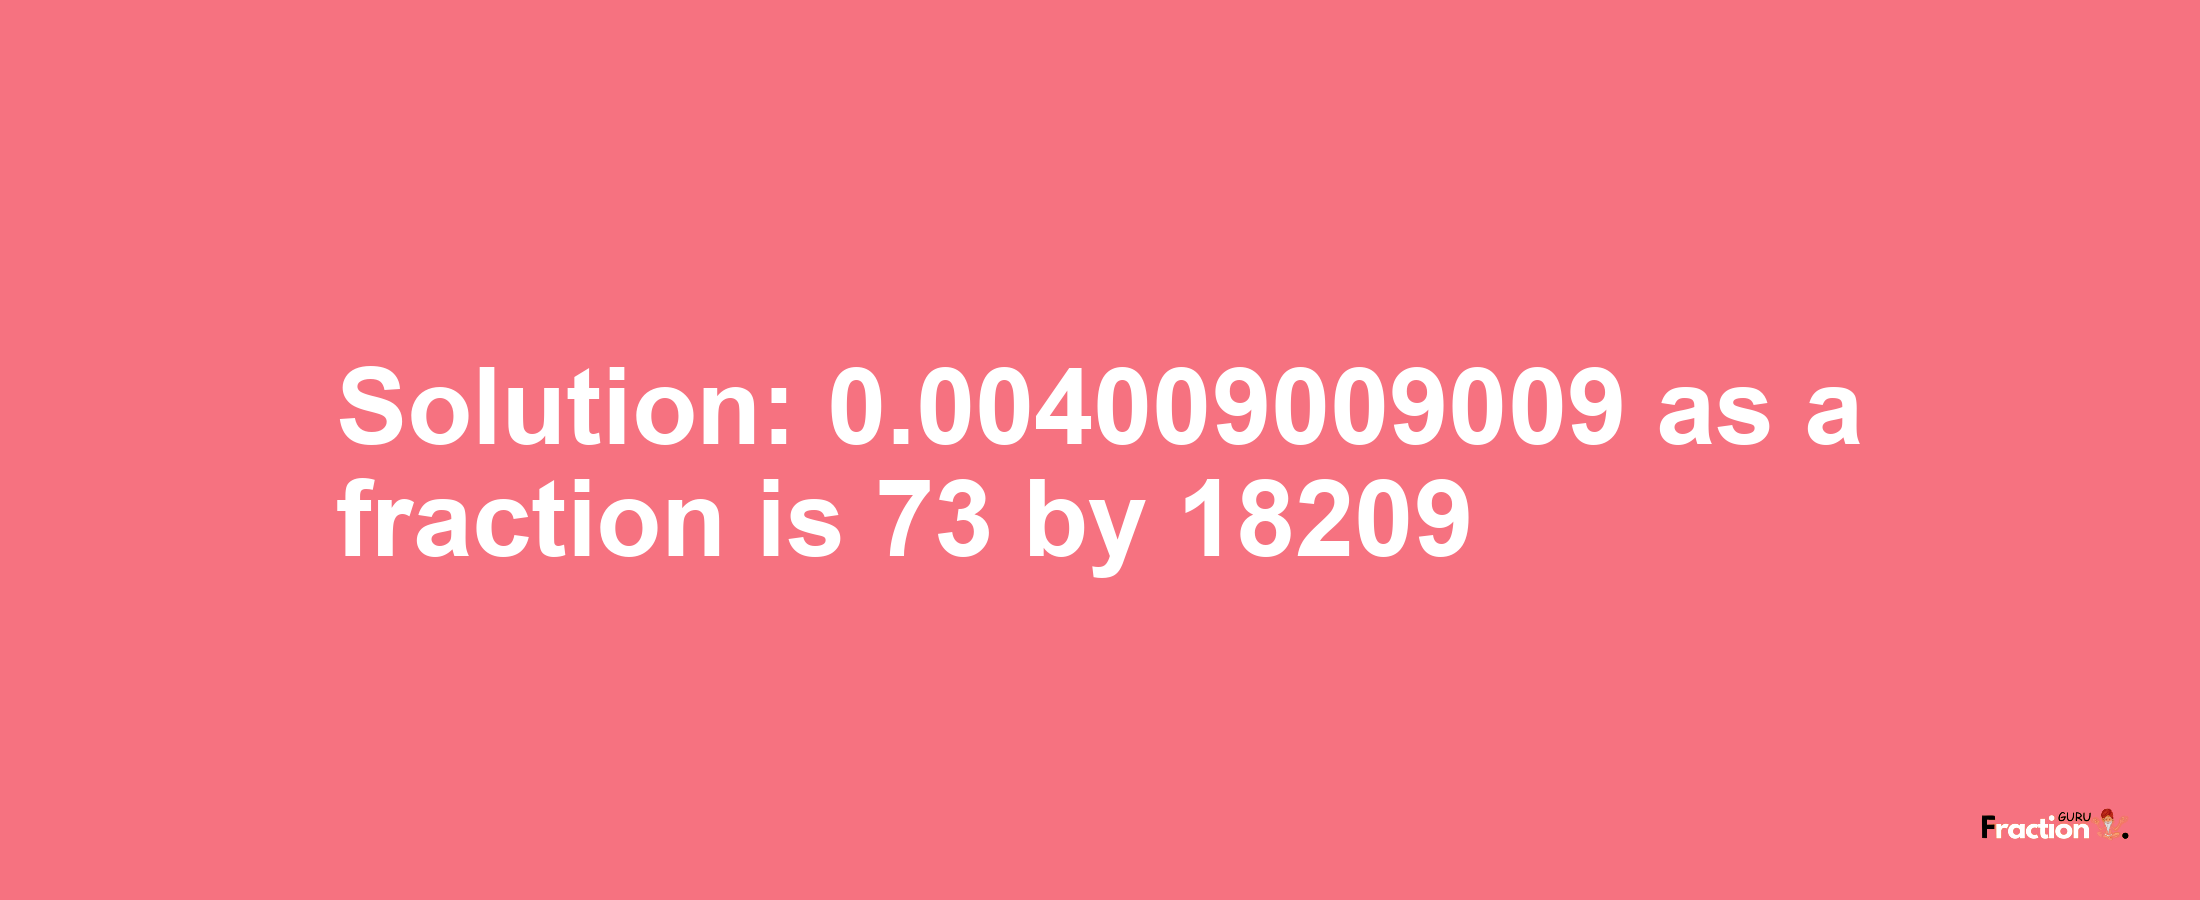 Solution:0.004009009009 as a fraction is 73/18209